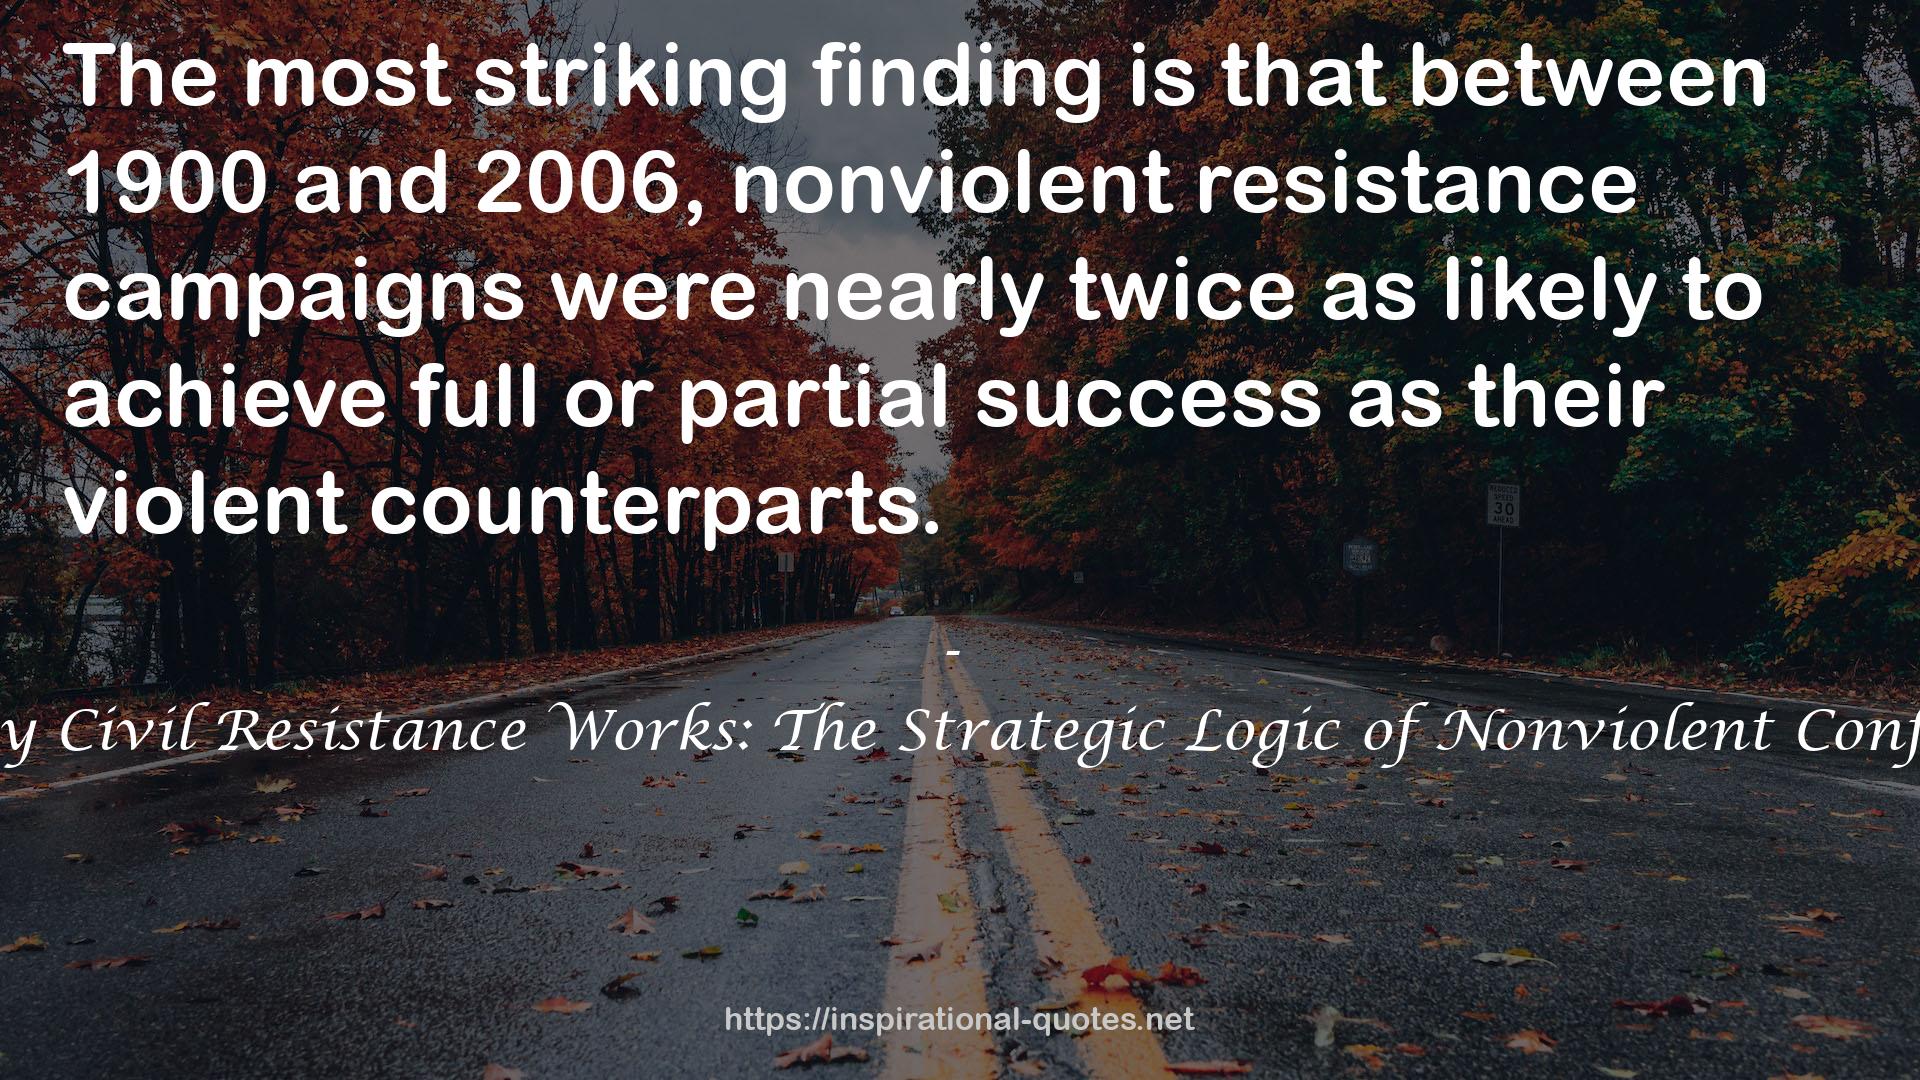 Why Civil Resistance Works: The Strategic Logic of Nonviolent Conflict QUOTES